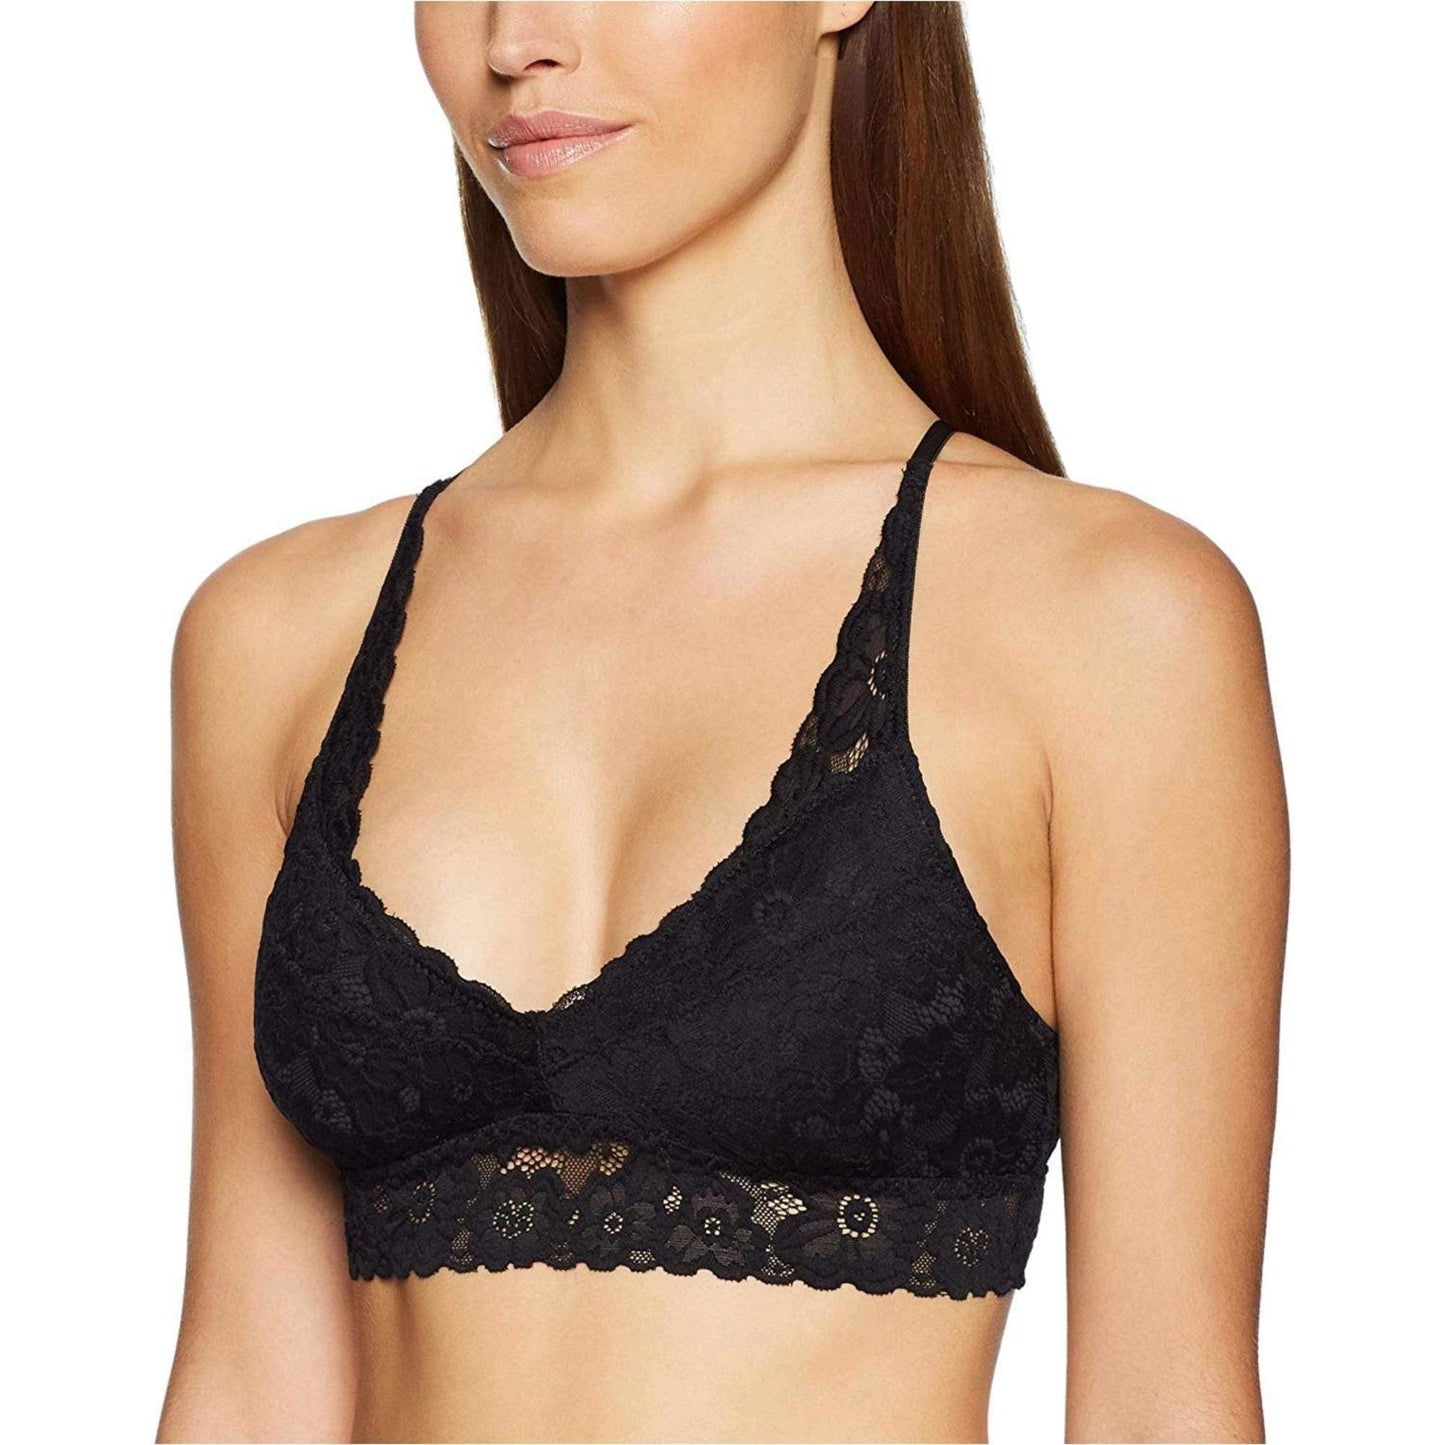 MAE womens underwear Large / Black Lace Racerback Bralette with Removable Pads